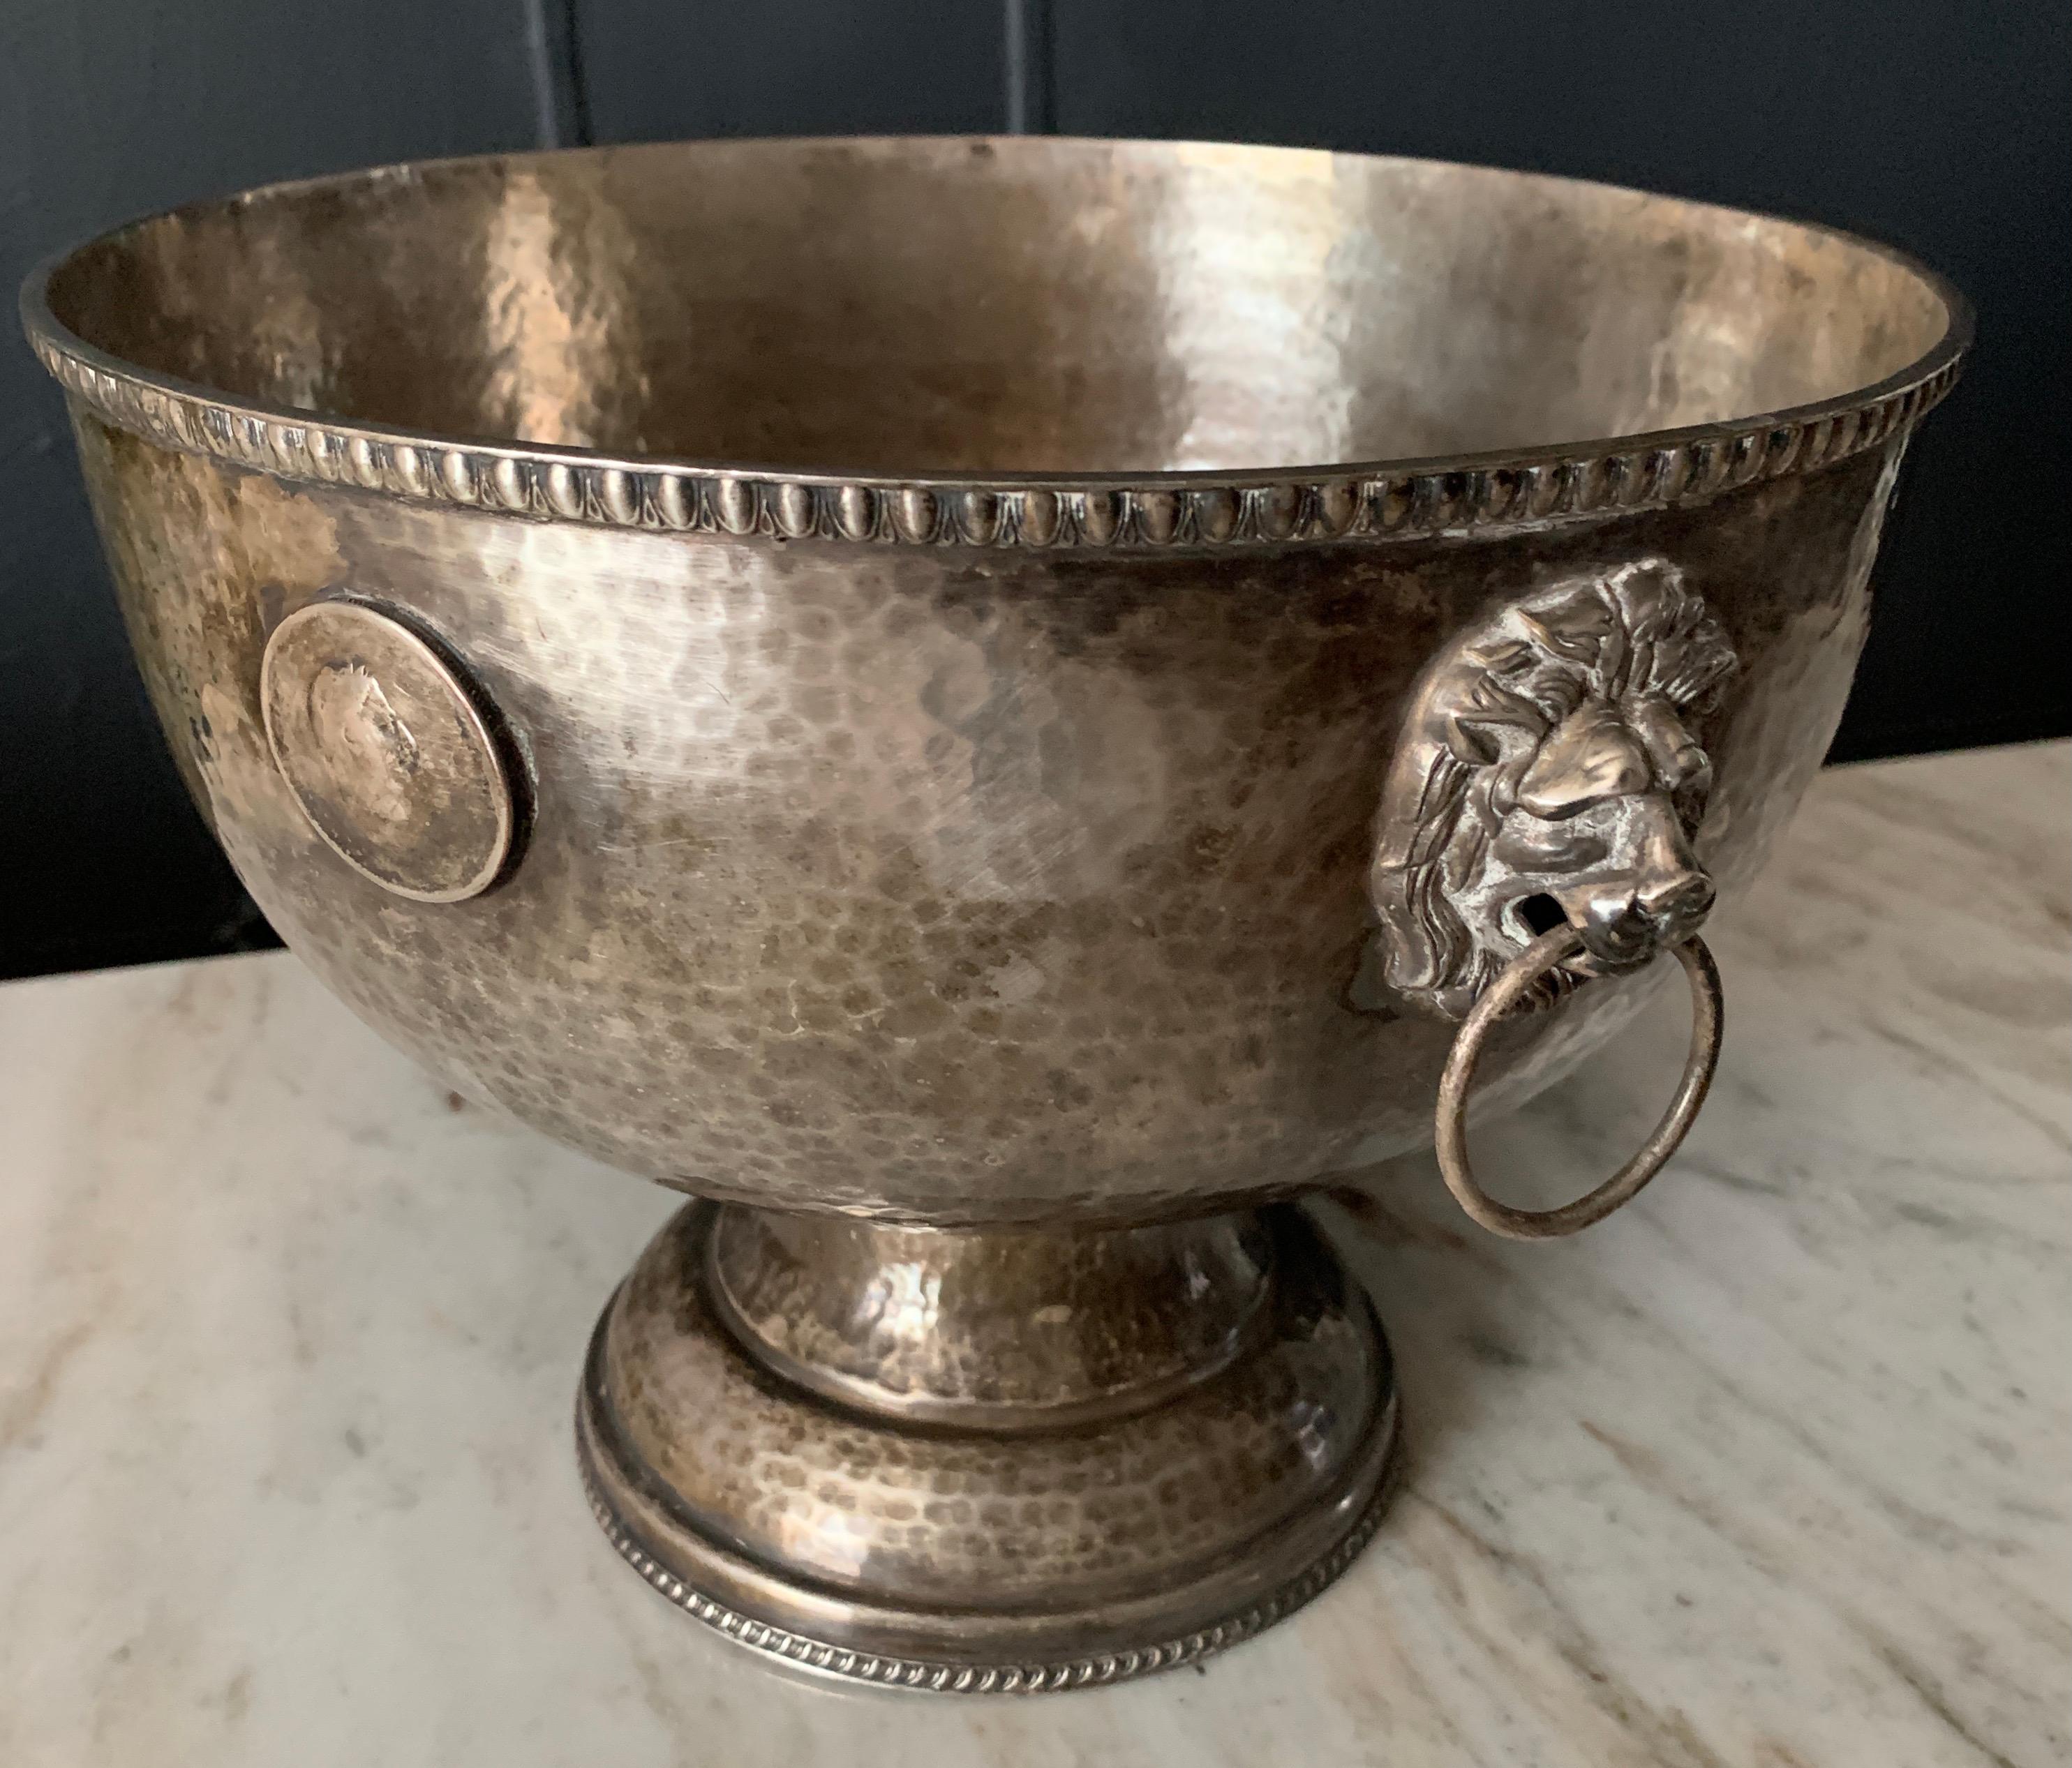 A wonderful hammered silver bowl with medallion details and lion head handles - the perfect size to be used for a serving piece, center piece, fruit bowl or catch all for mail, flowers.